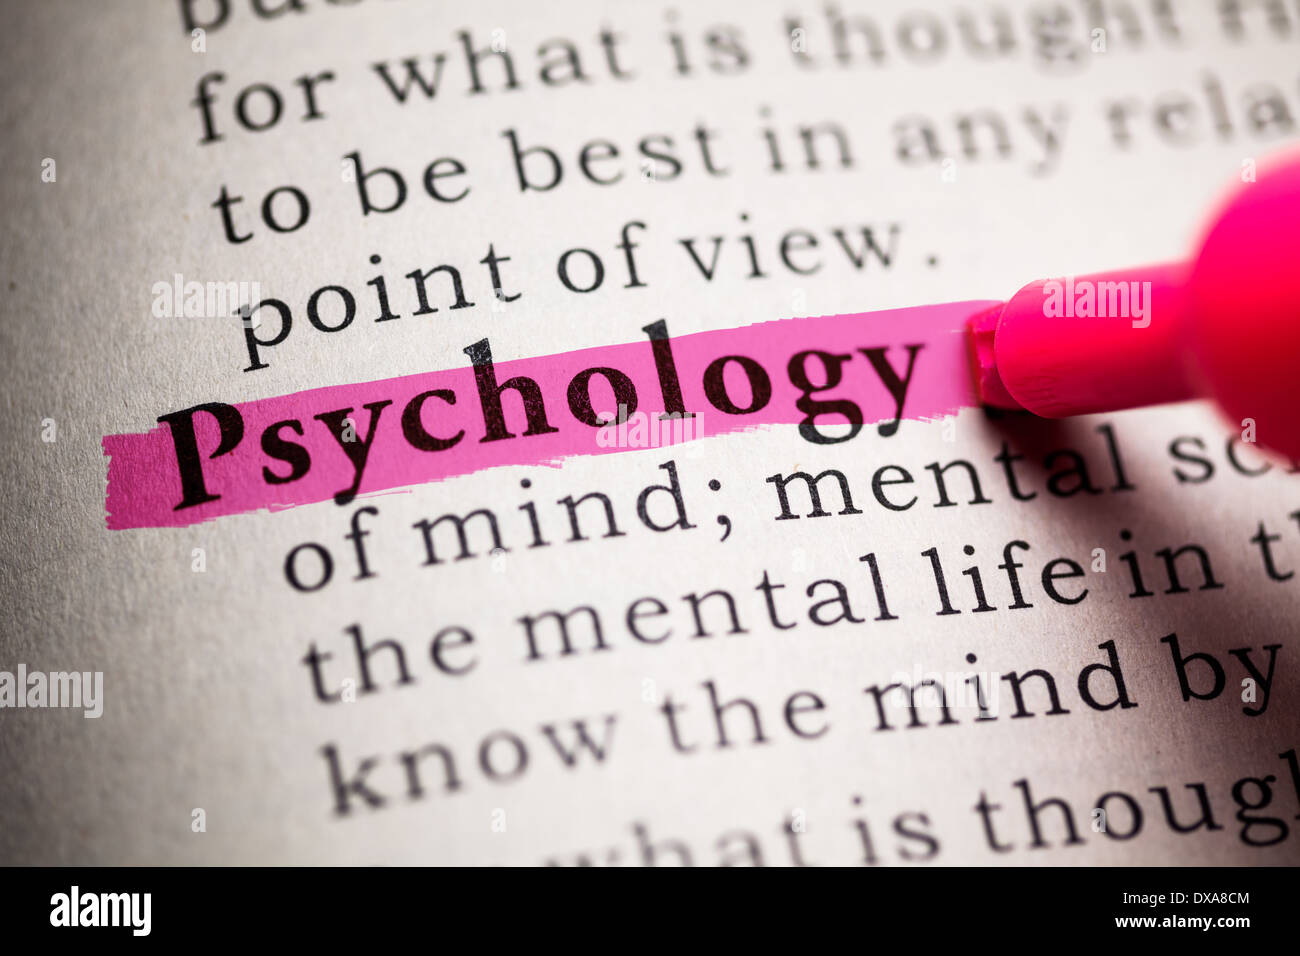 Fake Dictionary, definition of the word Psychology. Stock Photo